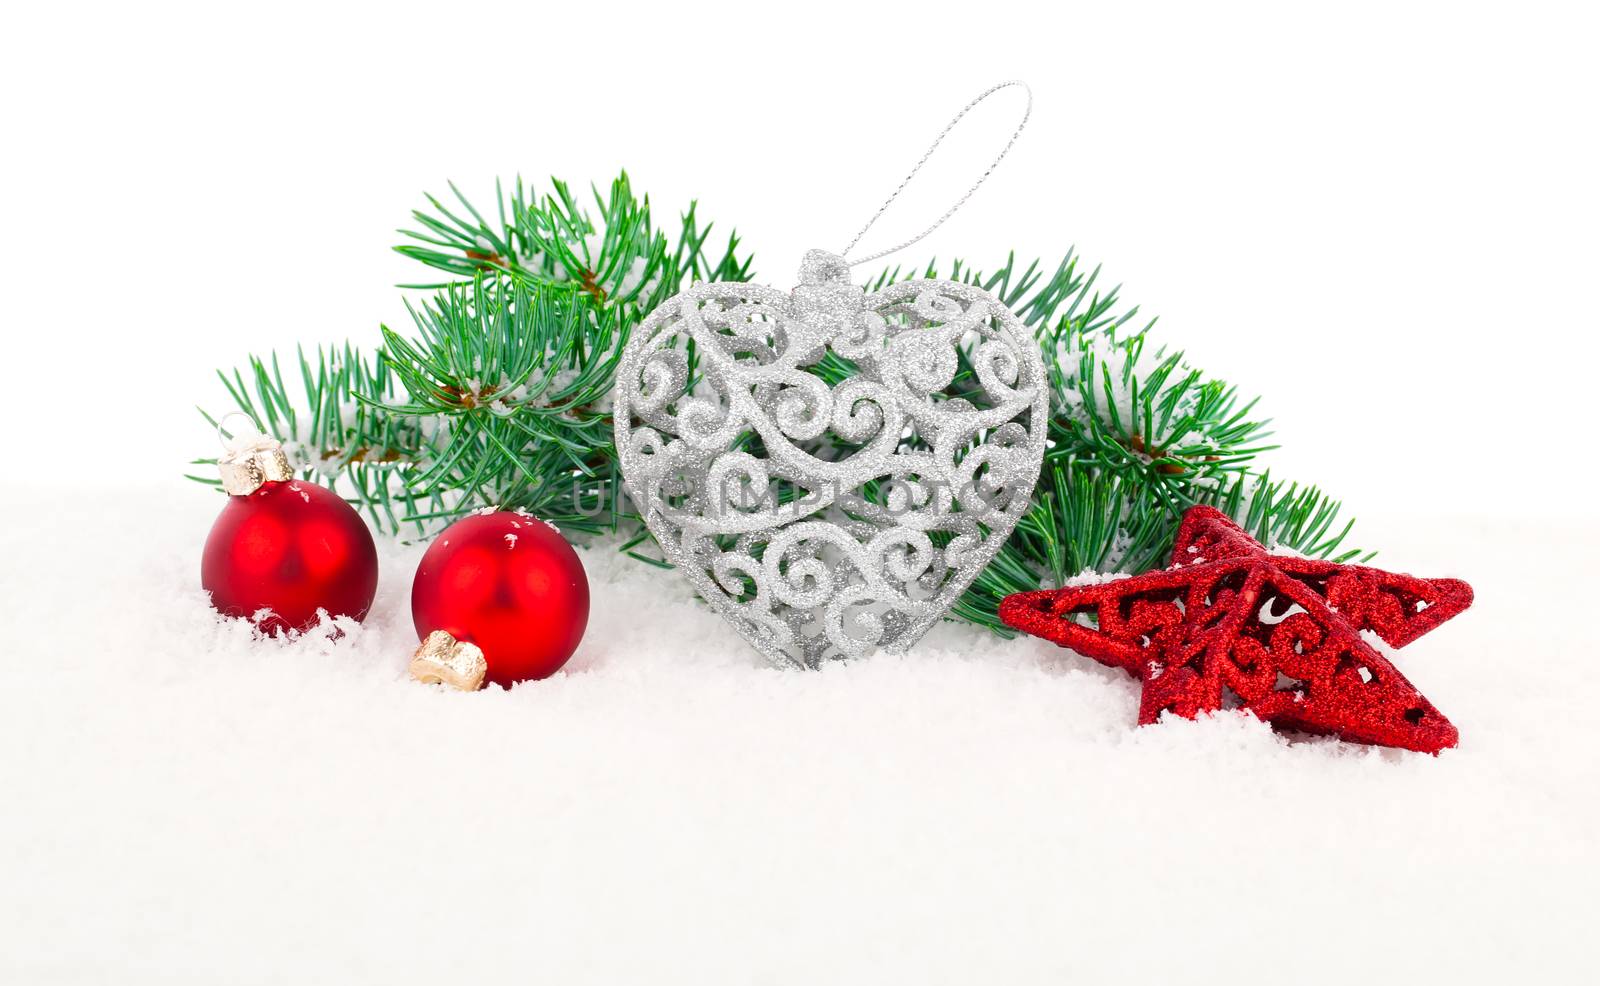 xmas decoration with copy space, isolated over white by motorolka